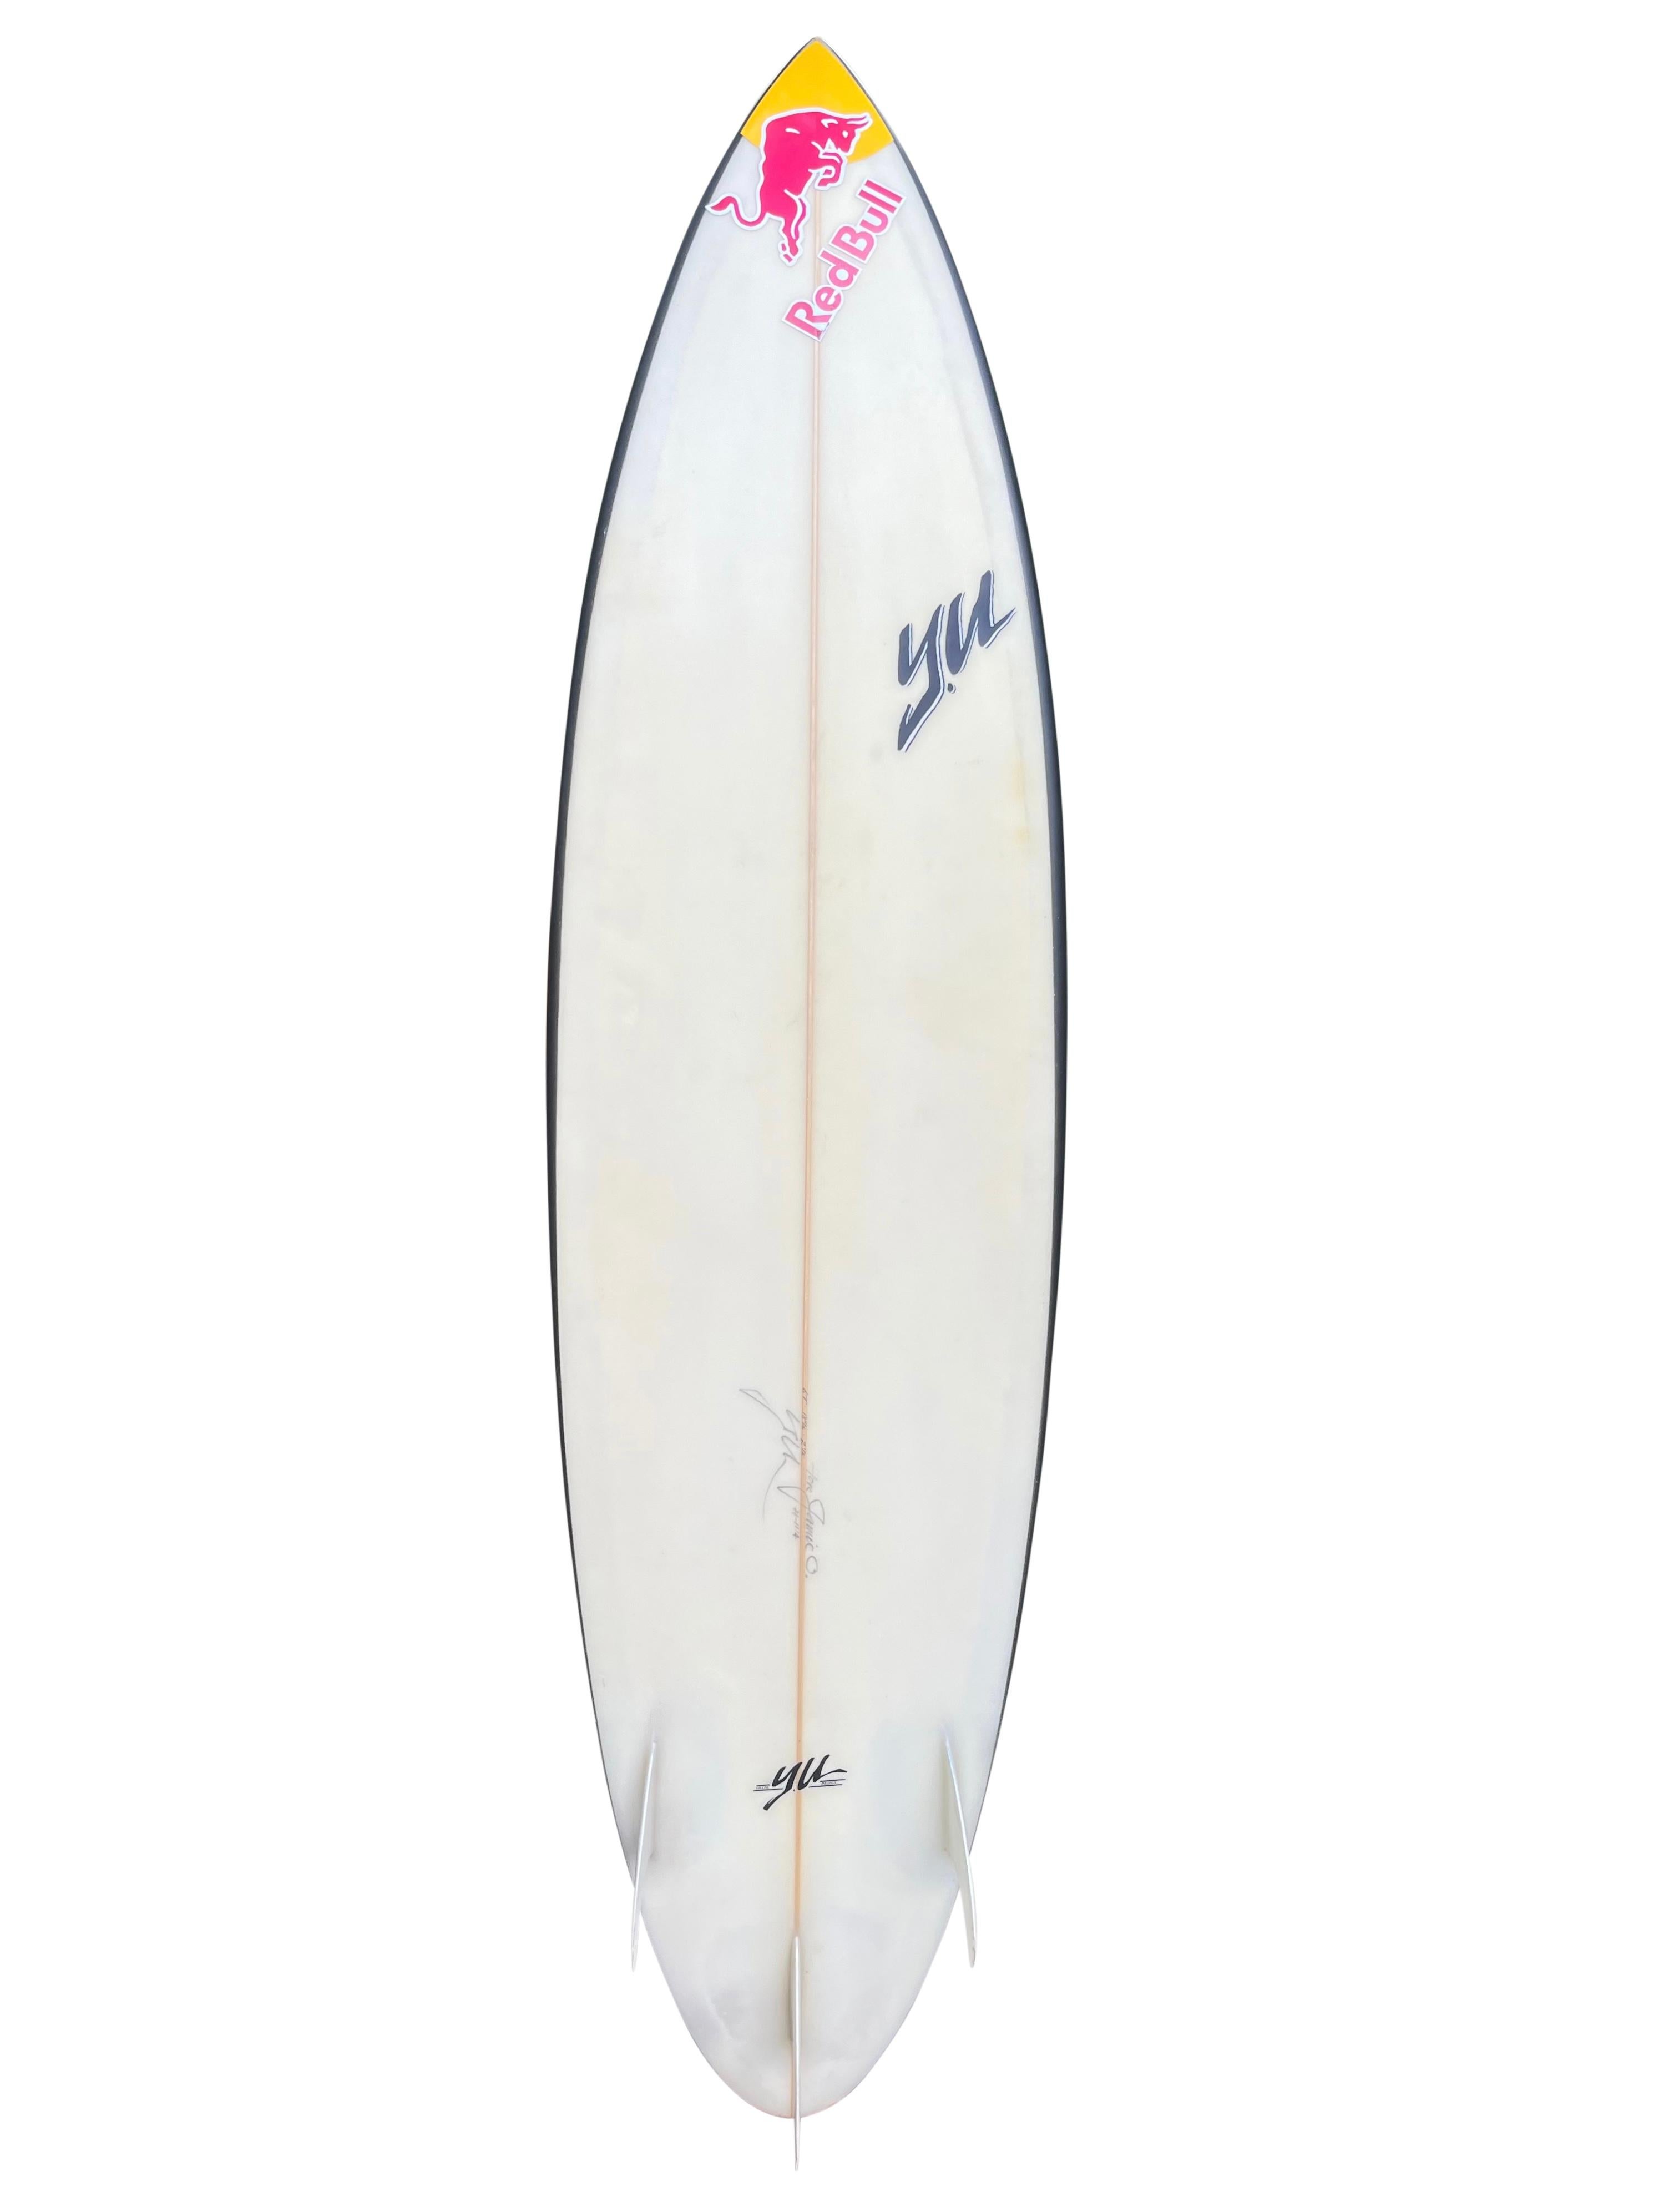 Jamie O’Brien’s personal Pipeline surfboard made by Y.U (Yoshinori Ueda). Features O’Brien’s signature pink airbrush-fade with jet black rails. Made specifically for riding barrels at iconic Hawaiian surf break, Banzai Pipeline. Round pintail shape